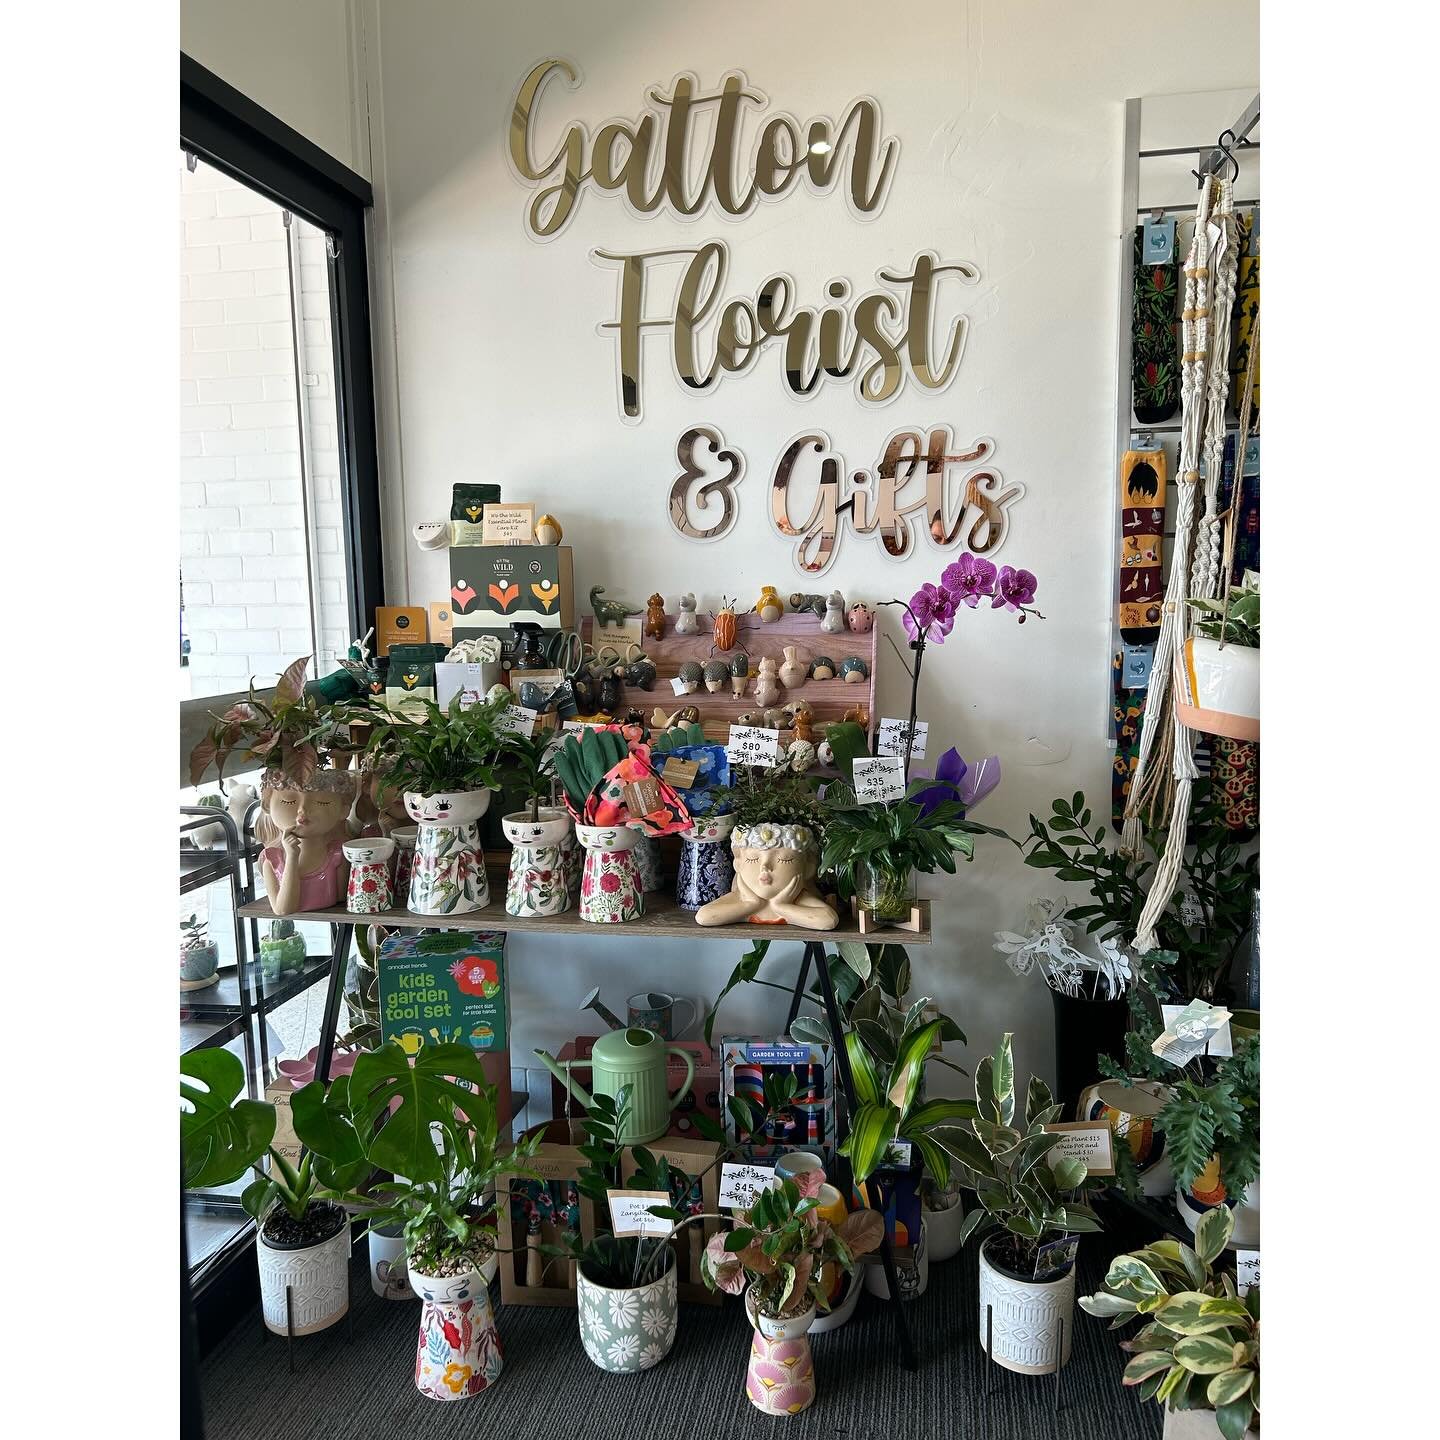 Happy Thursday 🪴 
We&rsquo;re open 8.30 - 5 today so pop in &amp; check out all of our awesome new arrivals 🤩 ✌️ 

We&rsquo;ve had a massive plant restock this week
🪴Phalaenopsis Orchid Plants
🪴 Plants potted in Doll Vases &amp; Quirky Pots
🪴 Ho